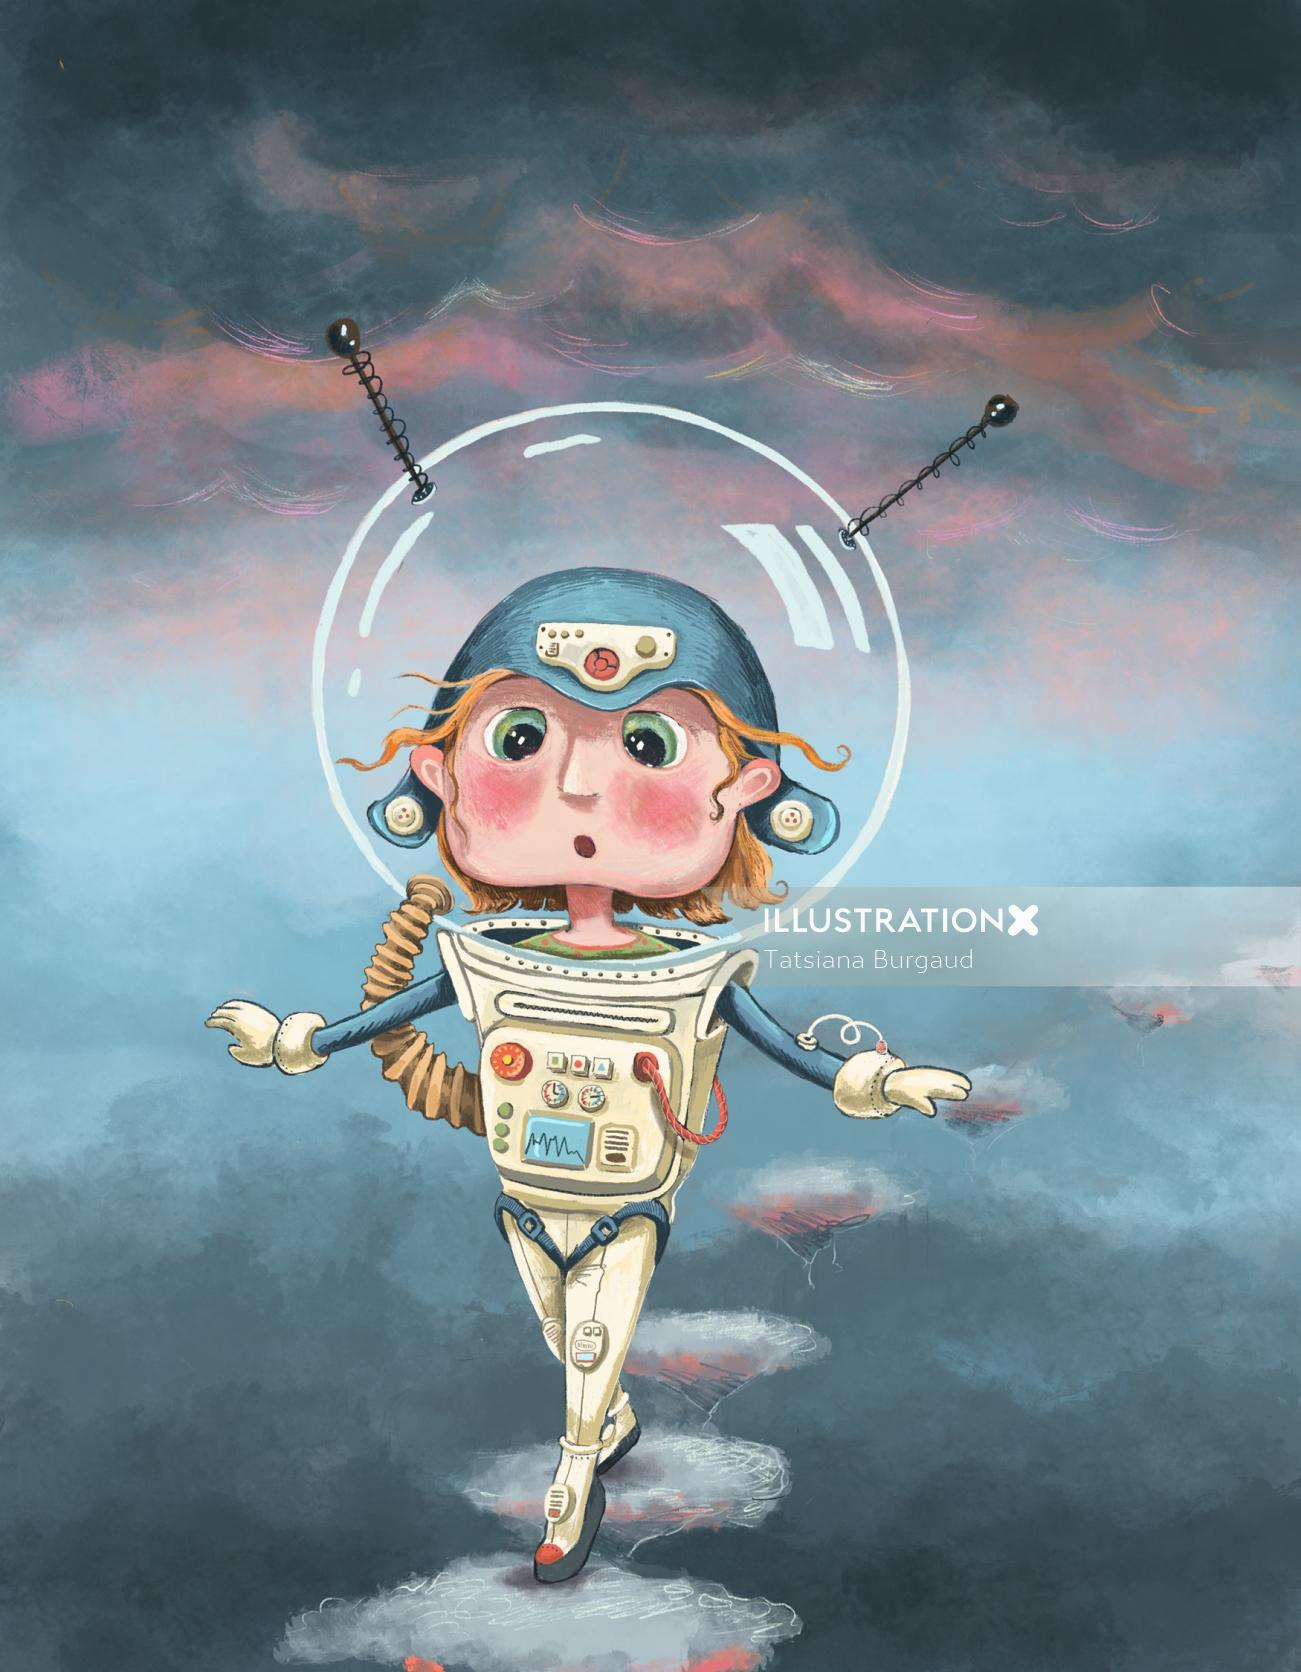 space, astronaut, sky, walk, clouds, girl, child, character